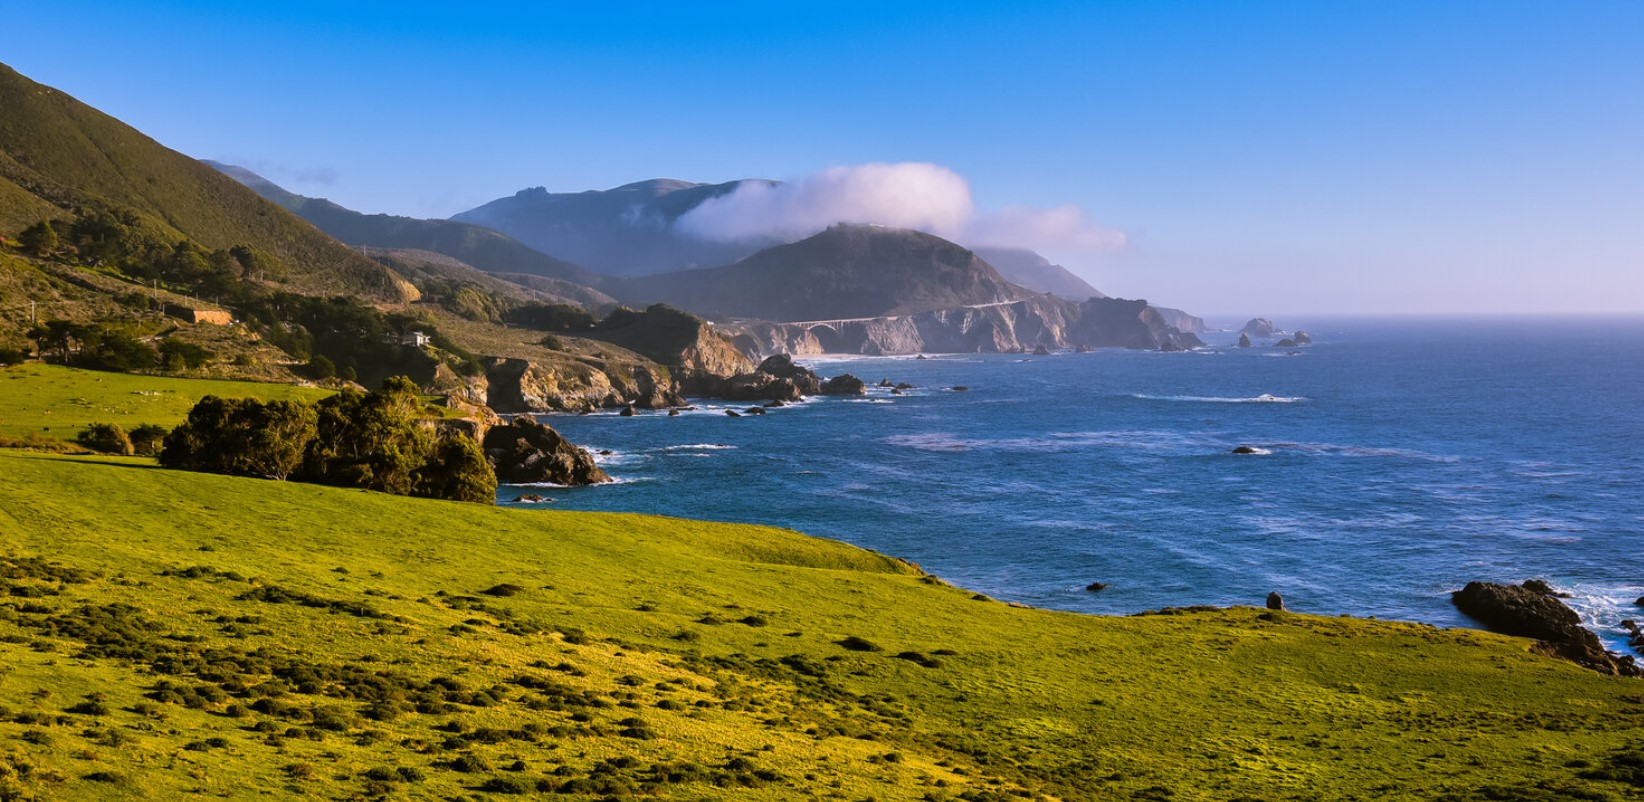 60 Best Places to Visit in California (California for Vacation)